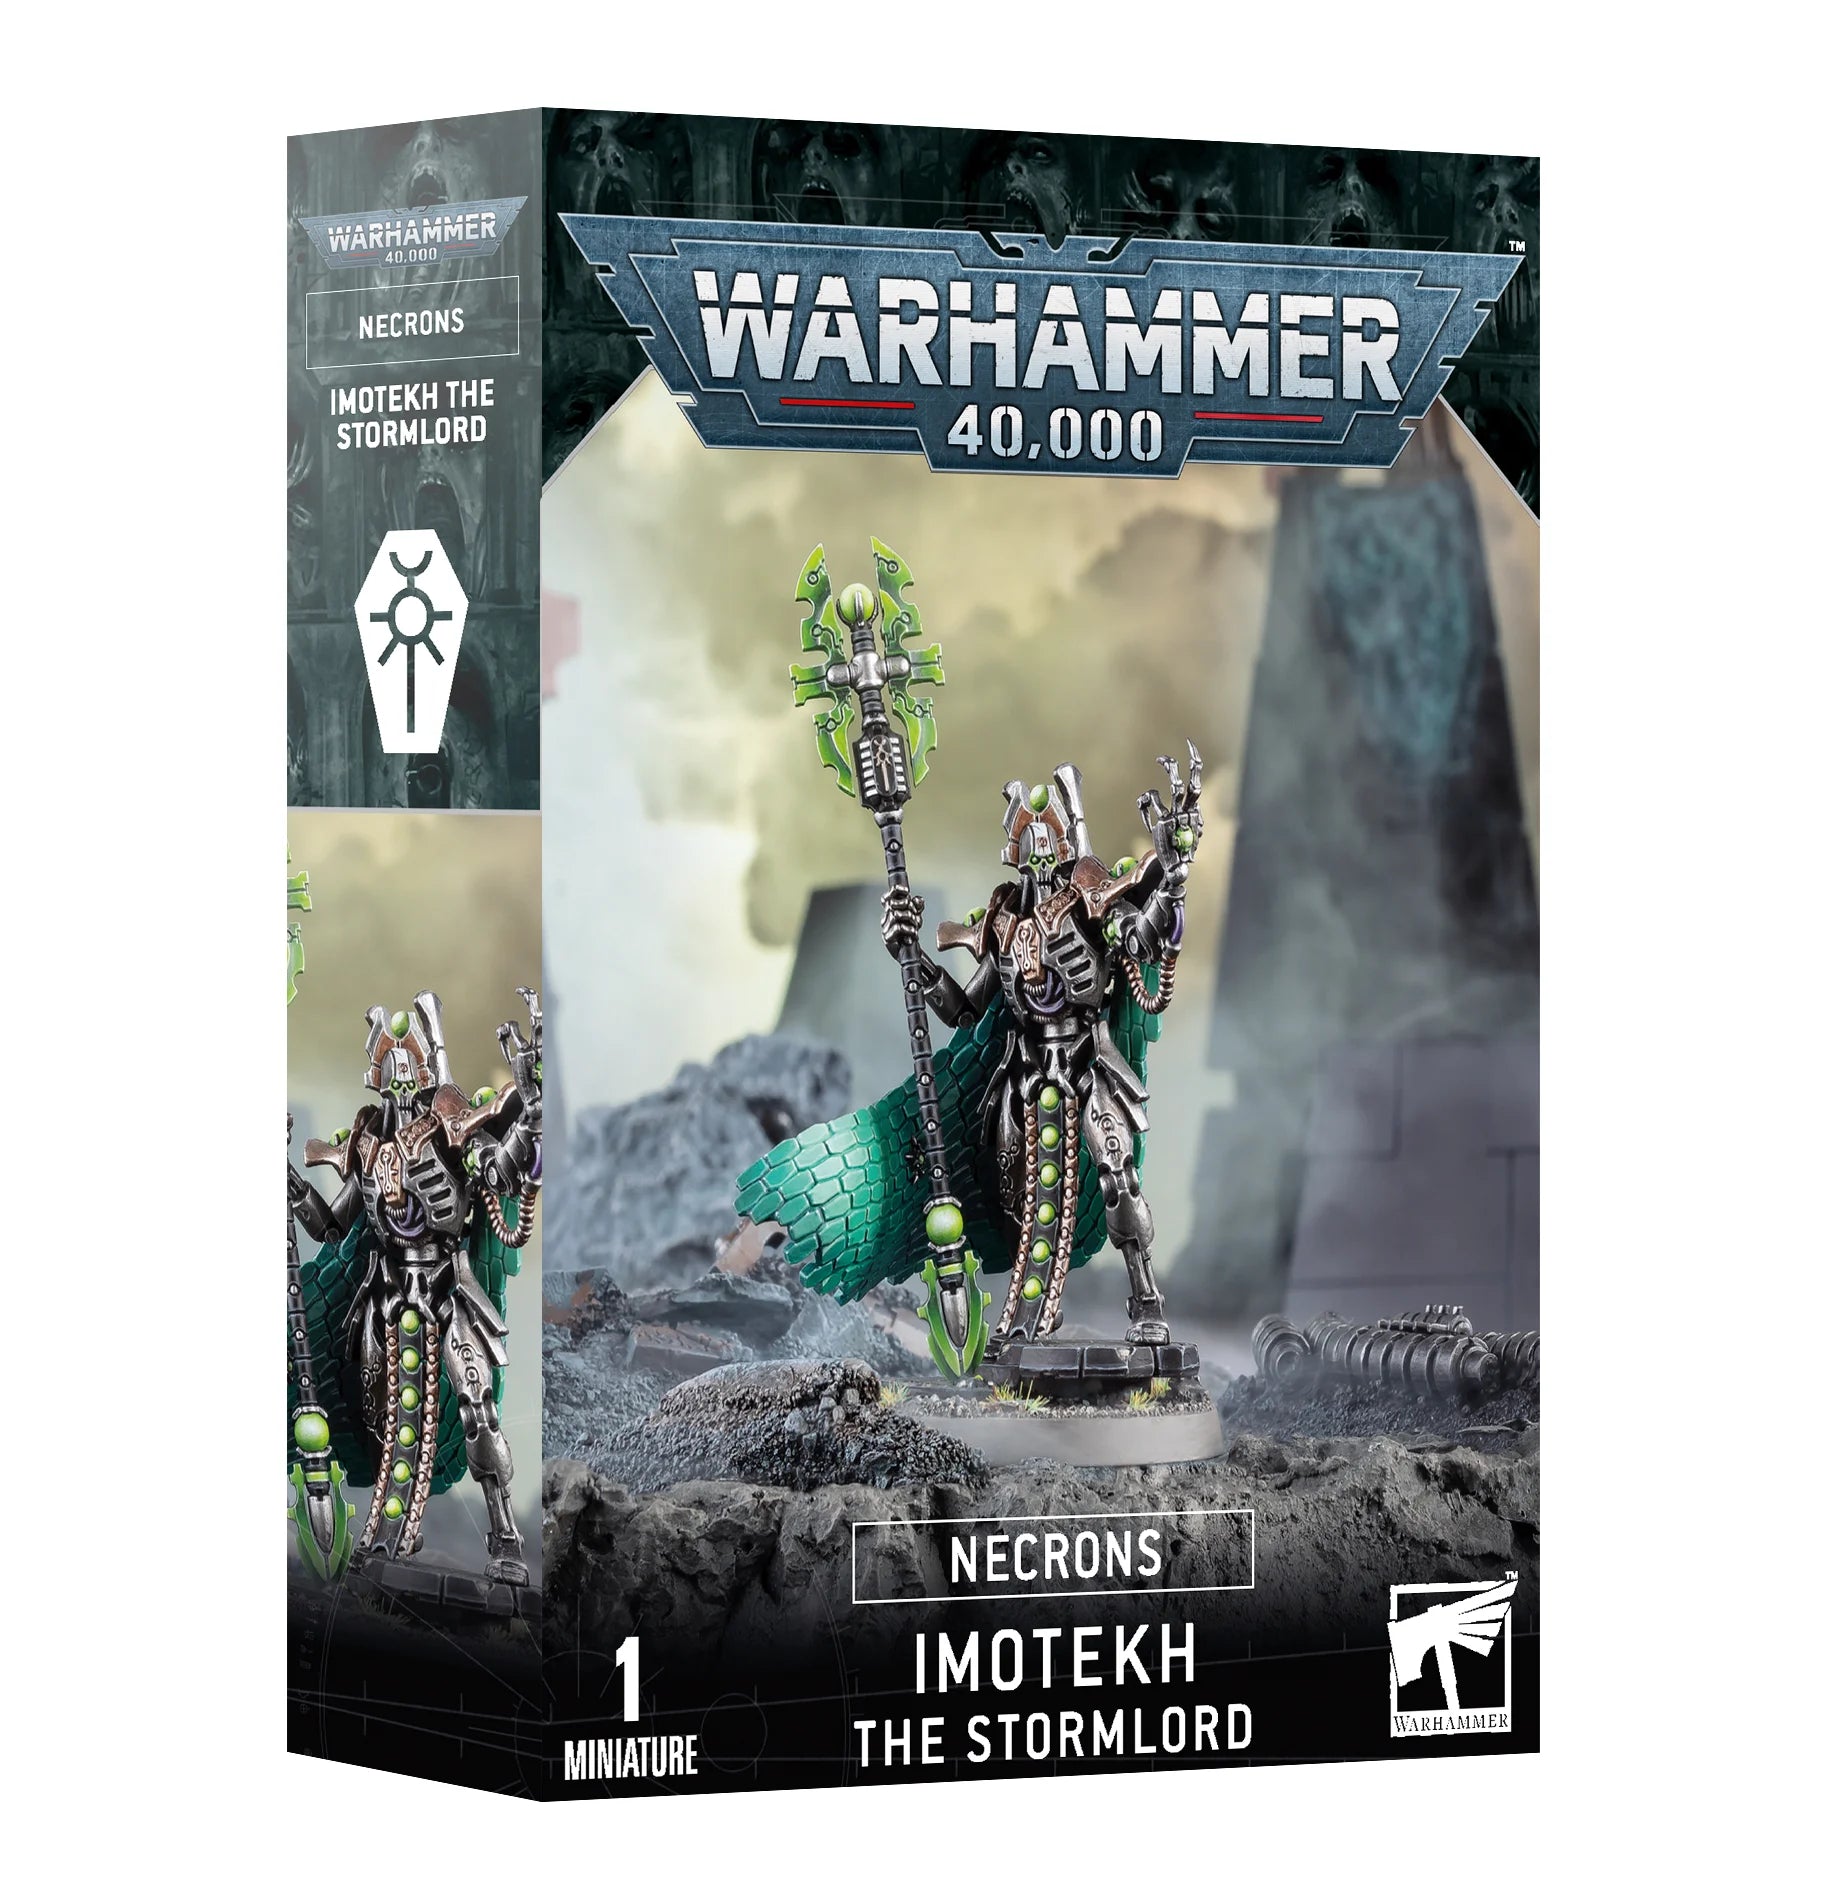 Warhammer 40000: Necrons Imotekh the Stormlord